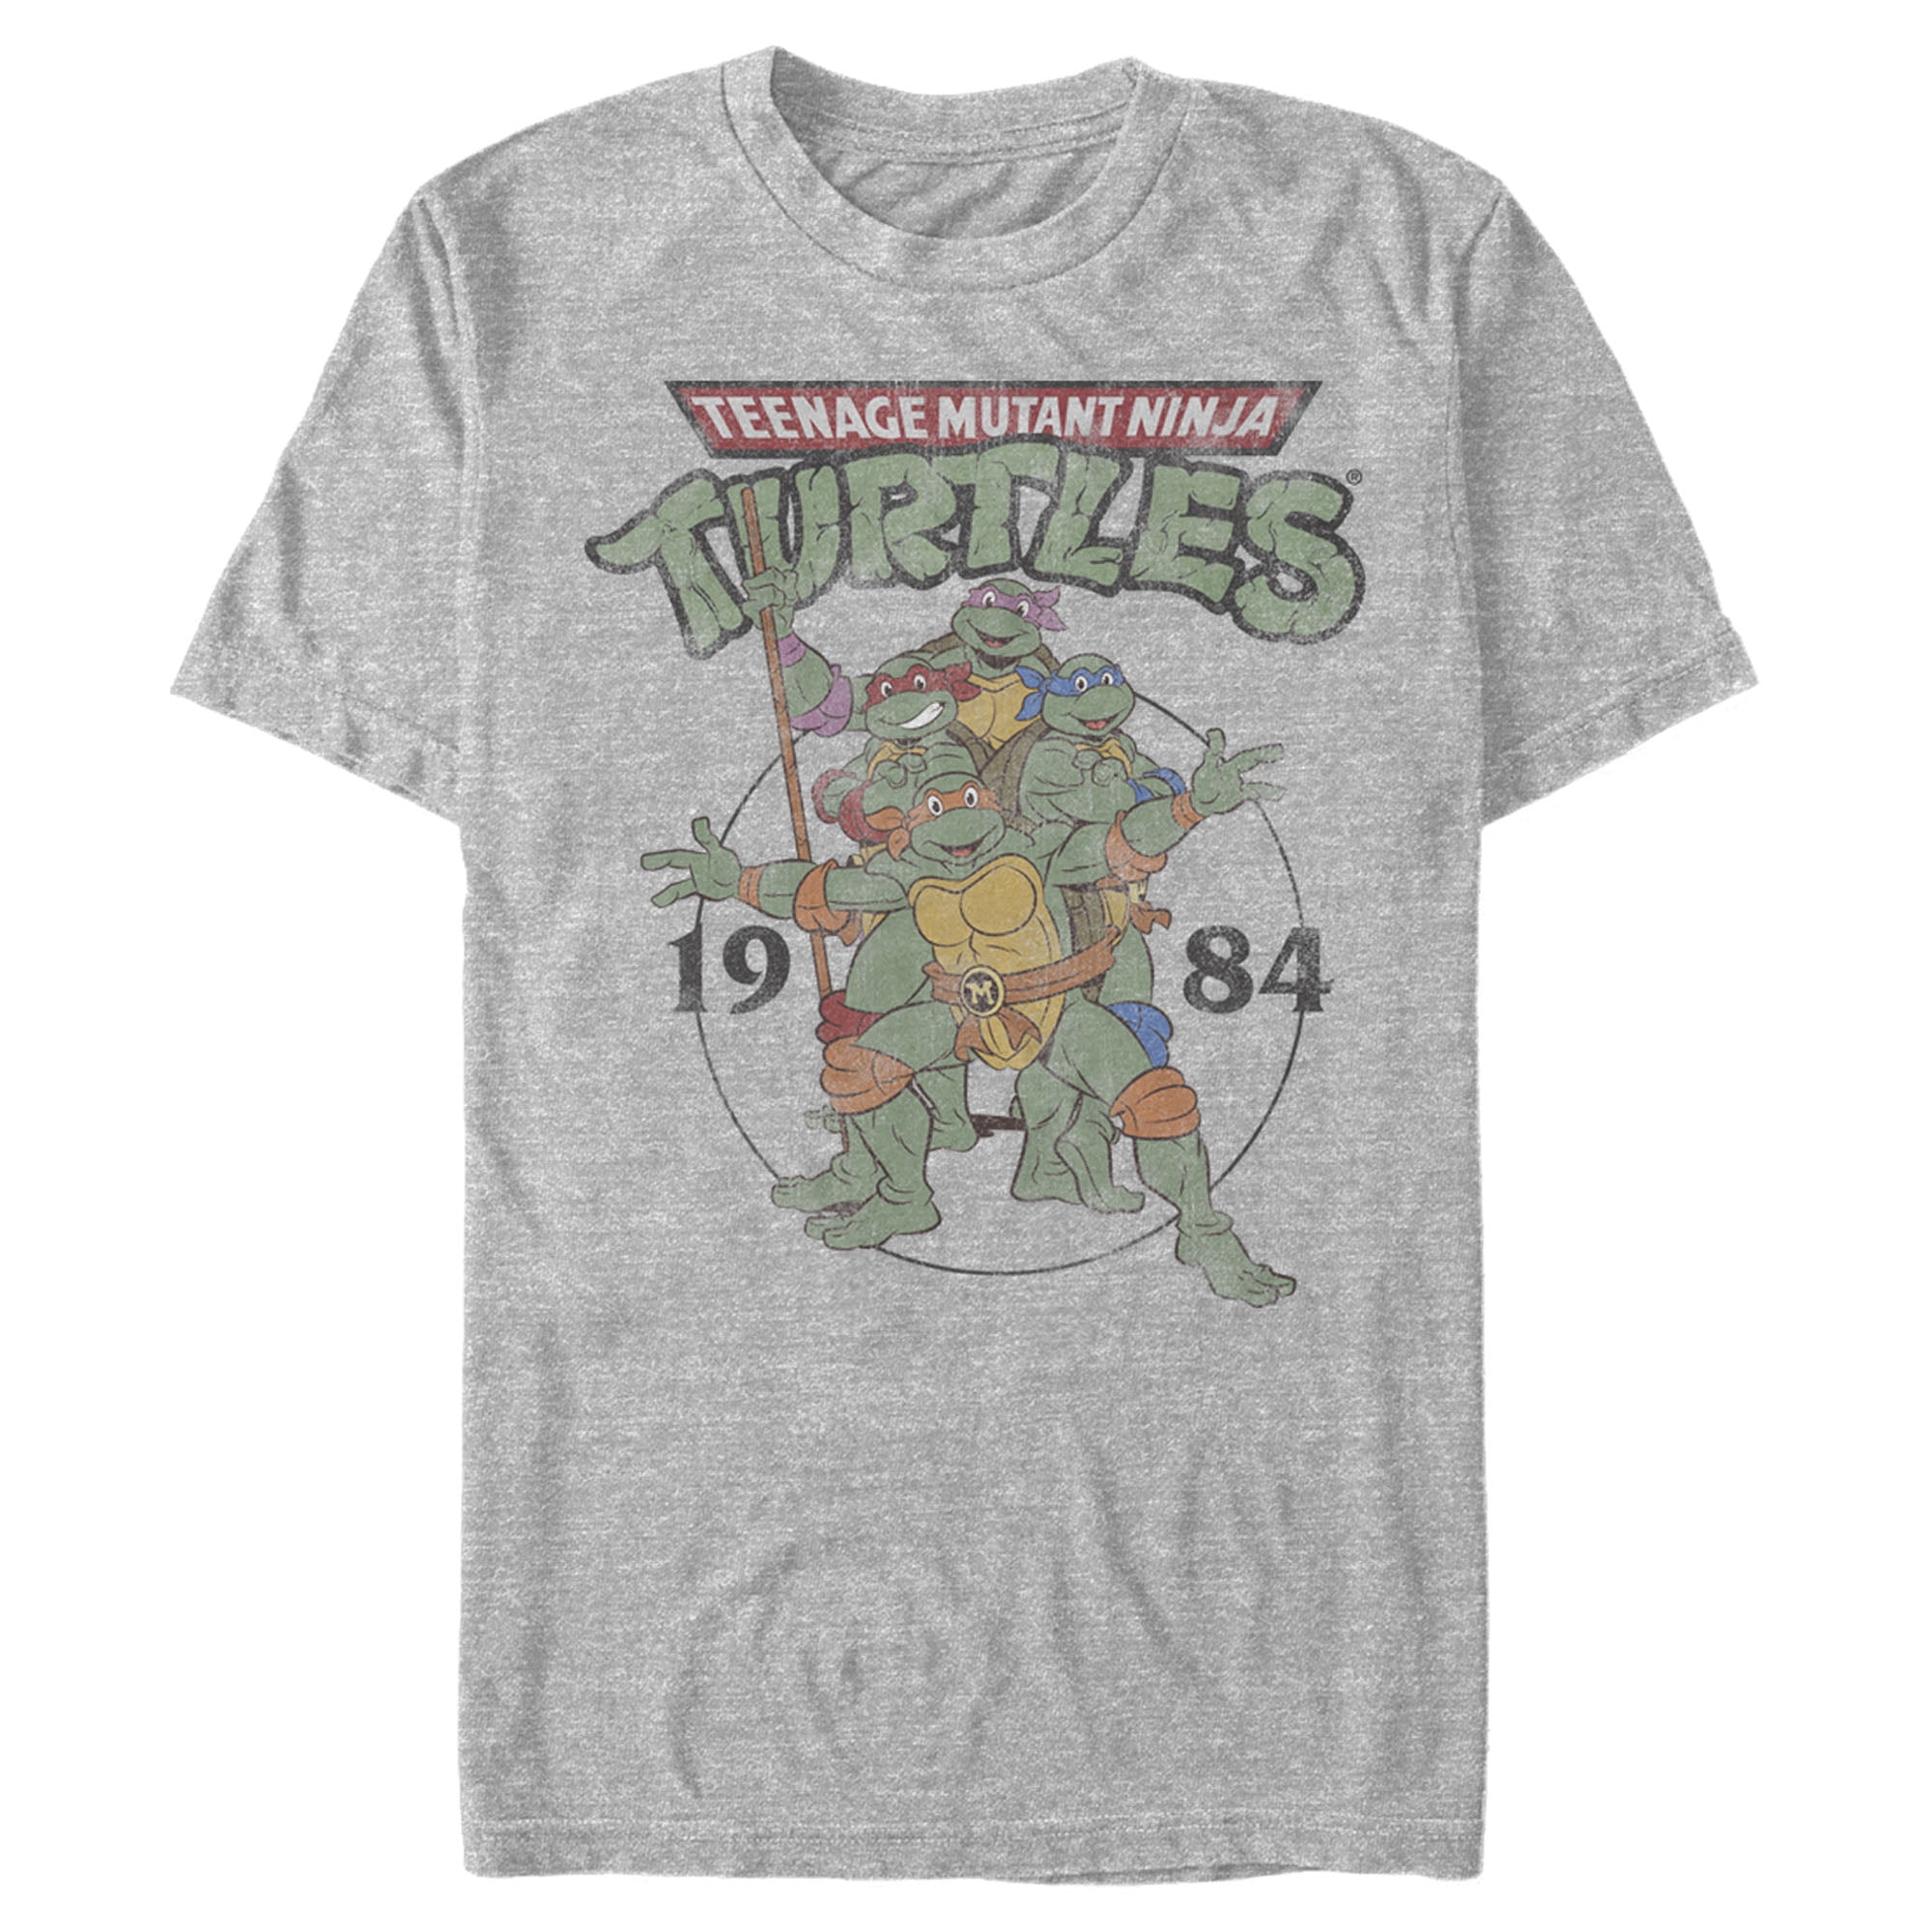 Mutated in 1984 Men's T-Shirt S-XXL Sizes Officially Licensed TMNT